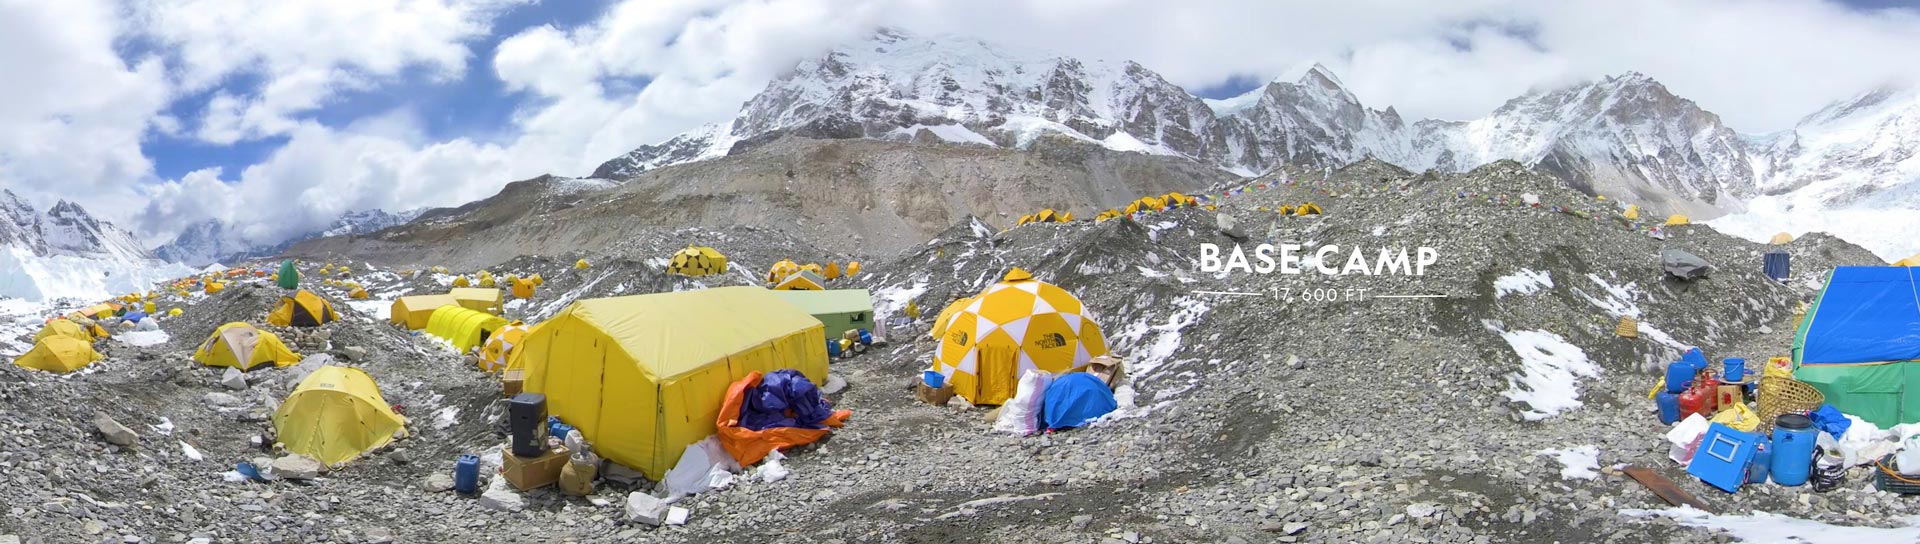 Panoramic view of Base Camp at Mount Everest with tents scattered about.